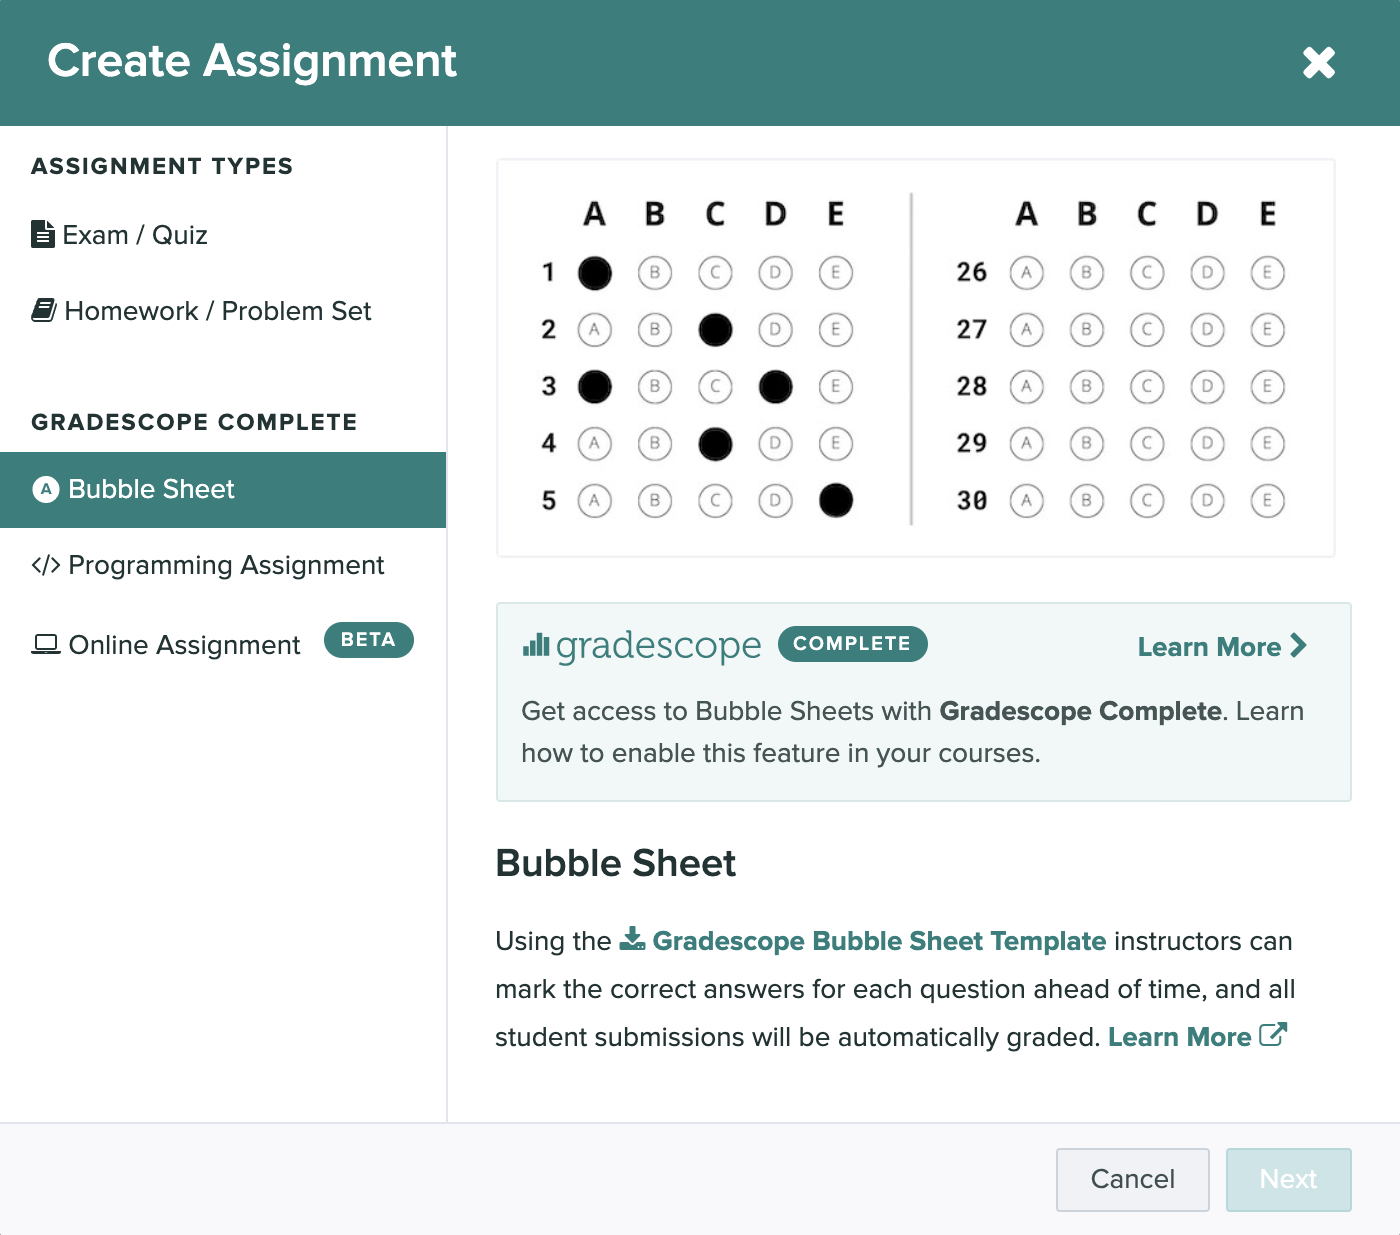 The create assignment modal is open and the bubble sheet option is selected.